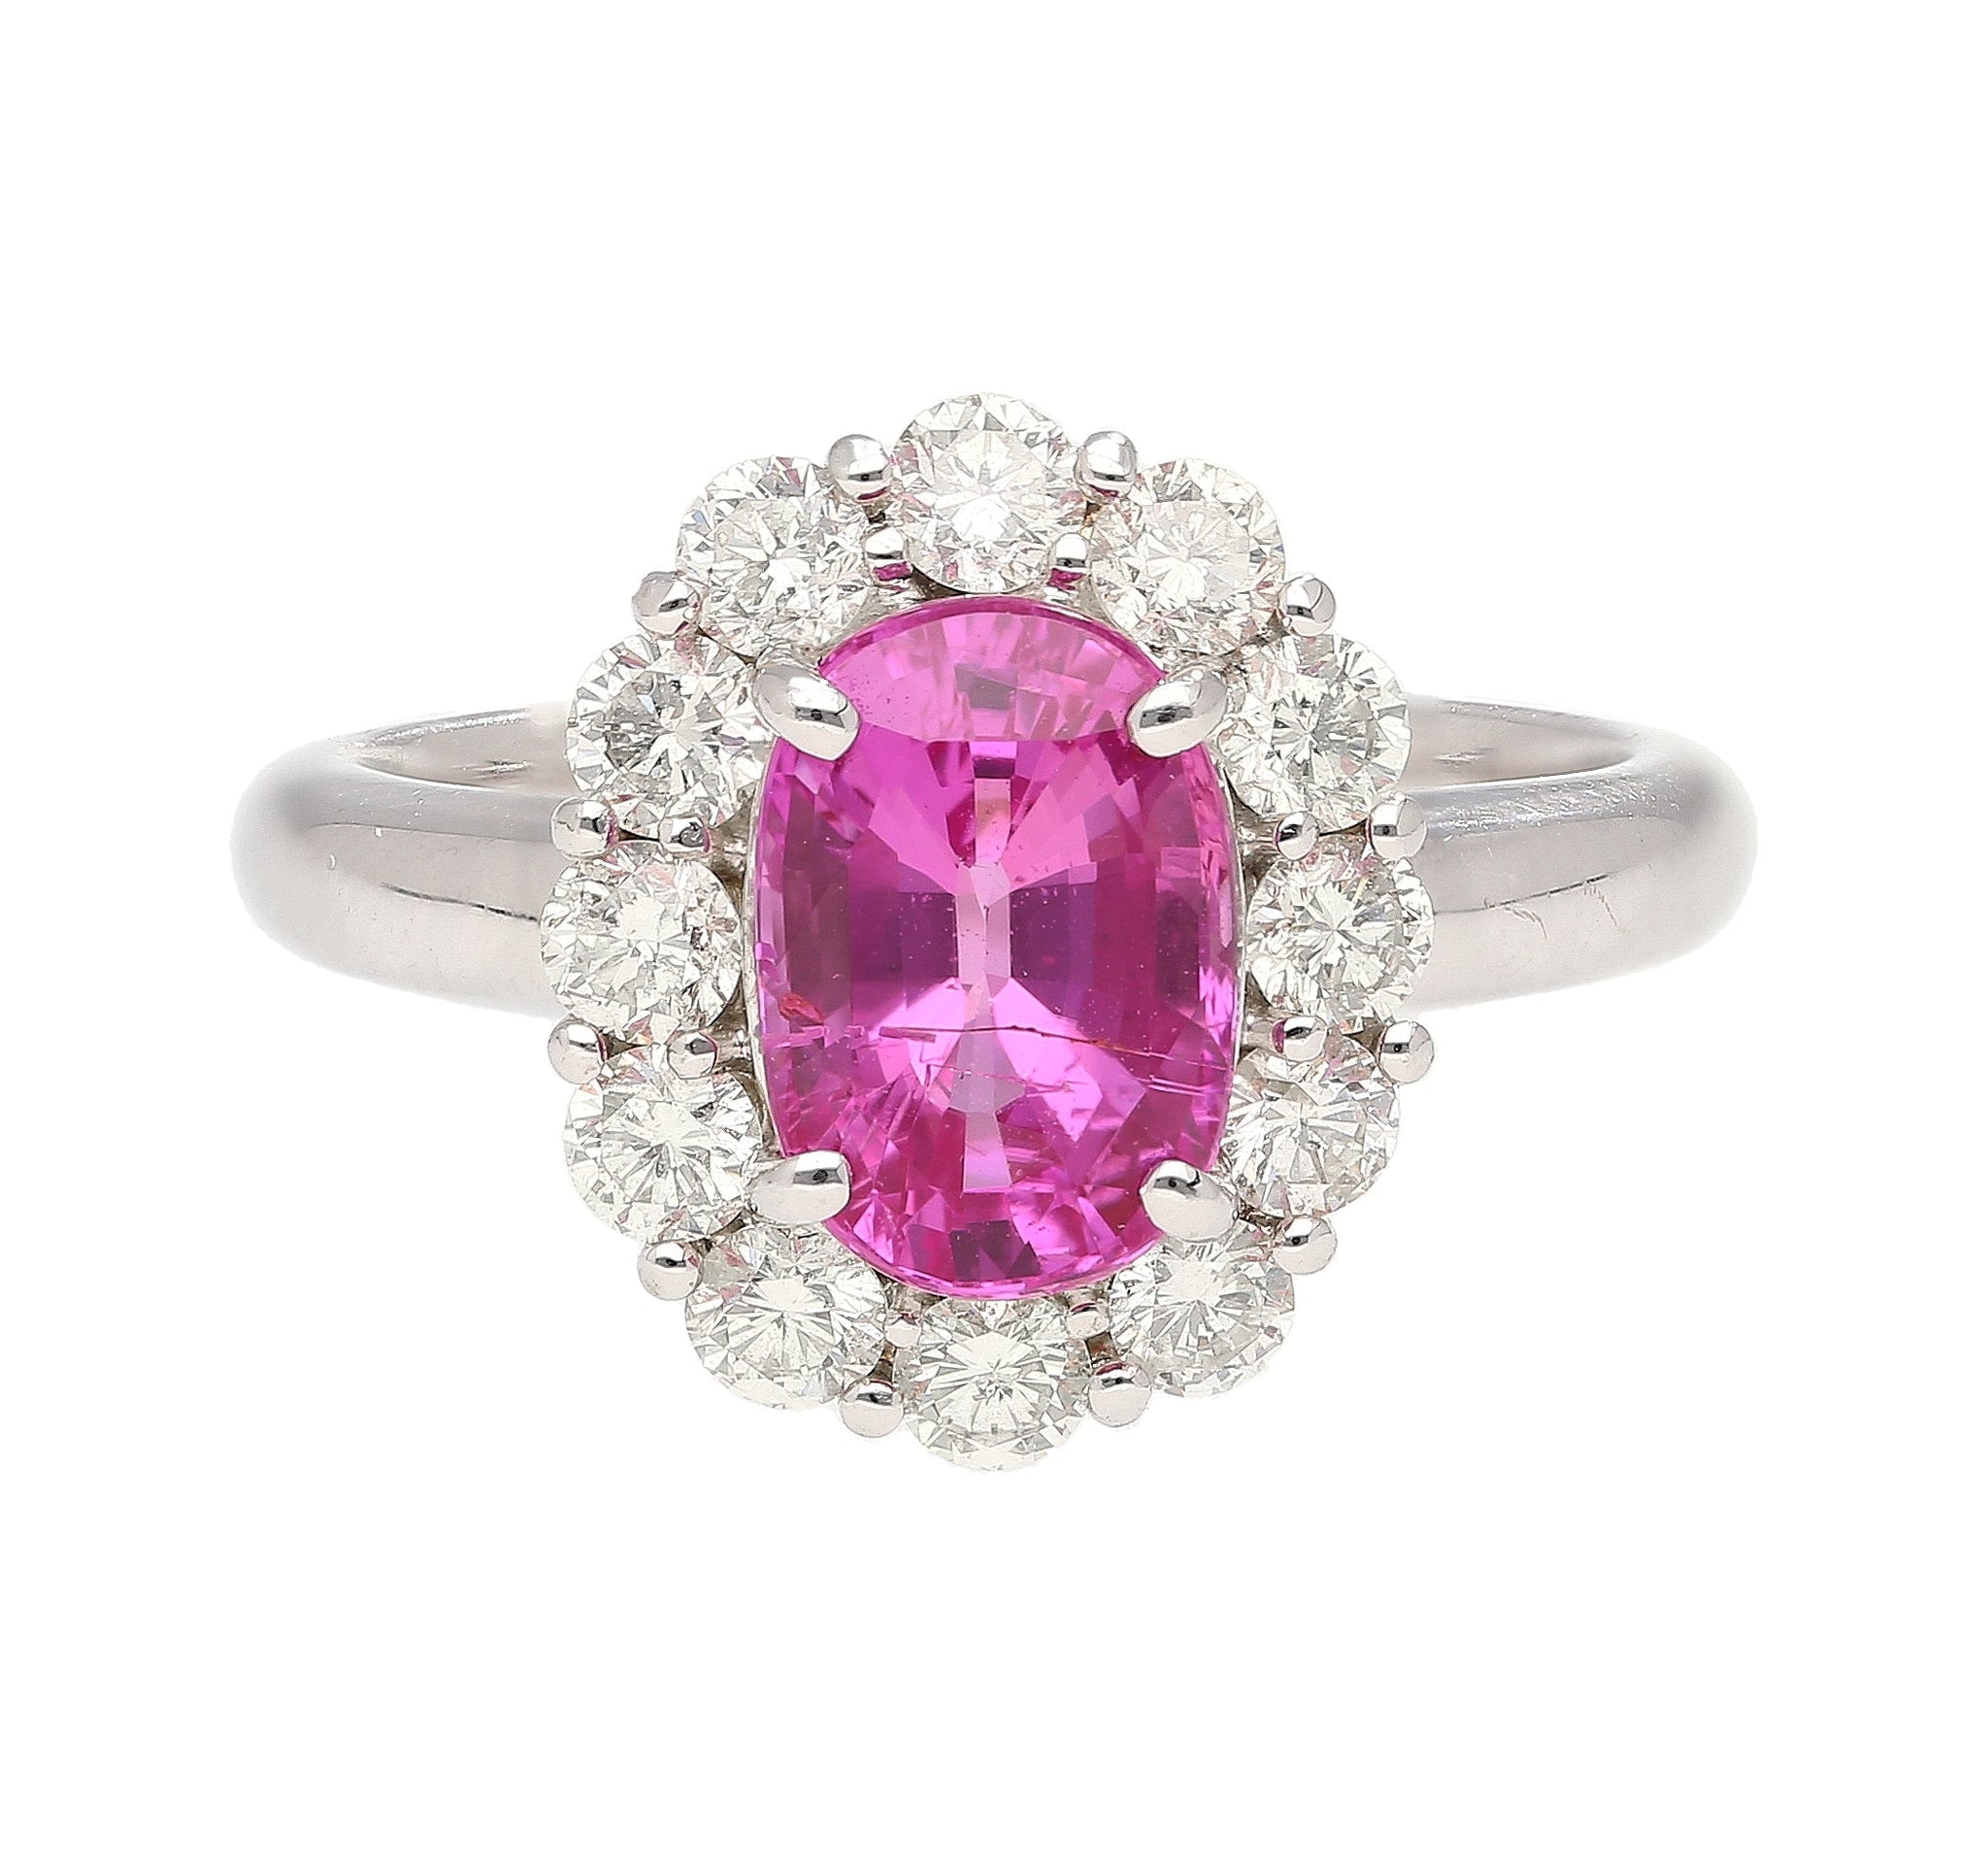 CGTL Certified 3.96 Carat Oval Cut Pink Sapphire and Diamond Halo Ring in 18k White Gold